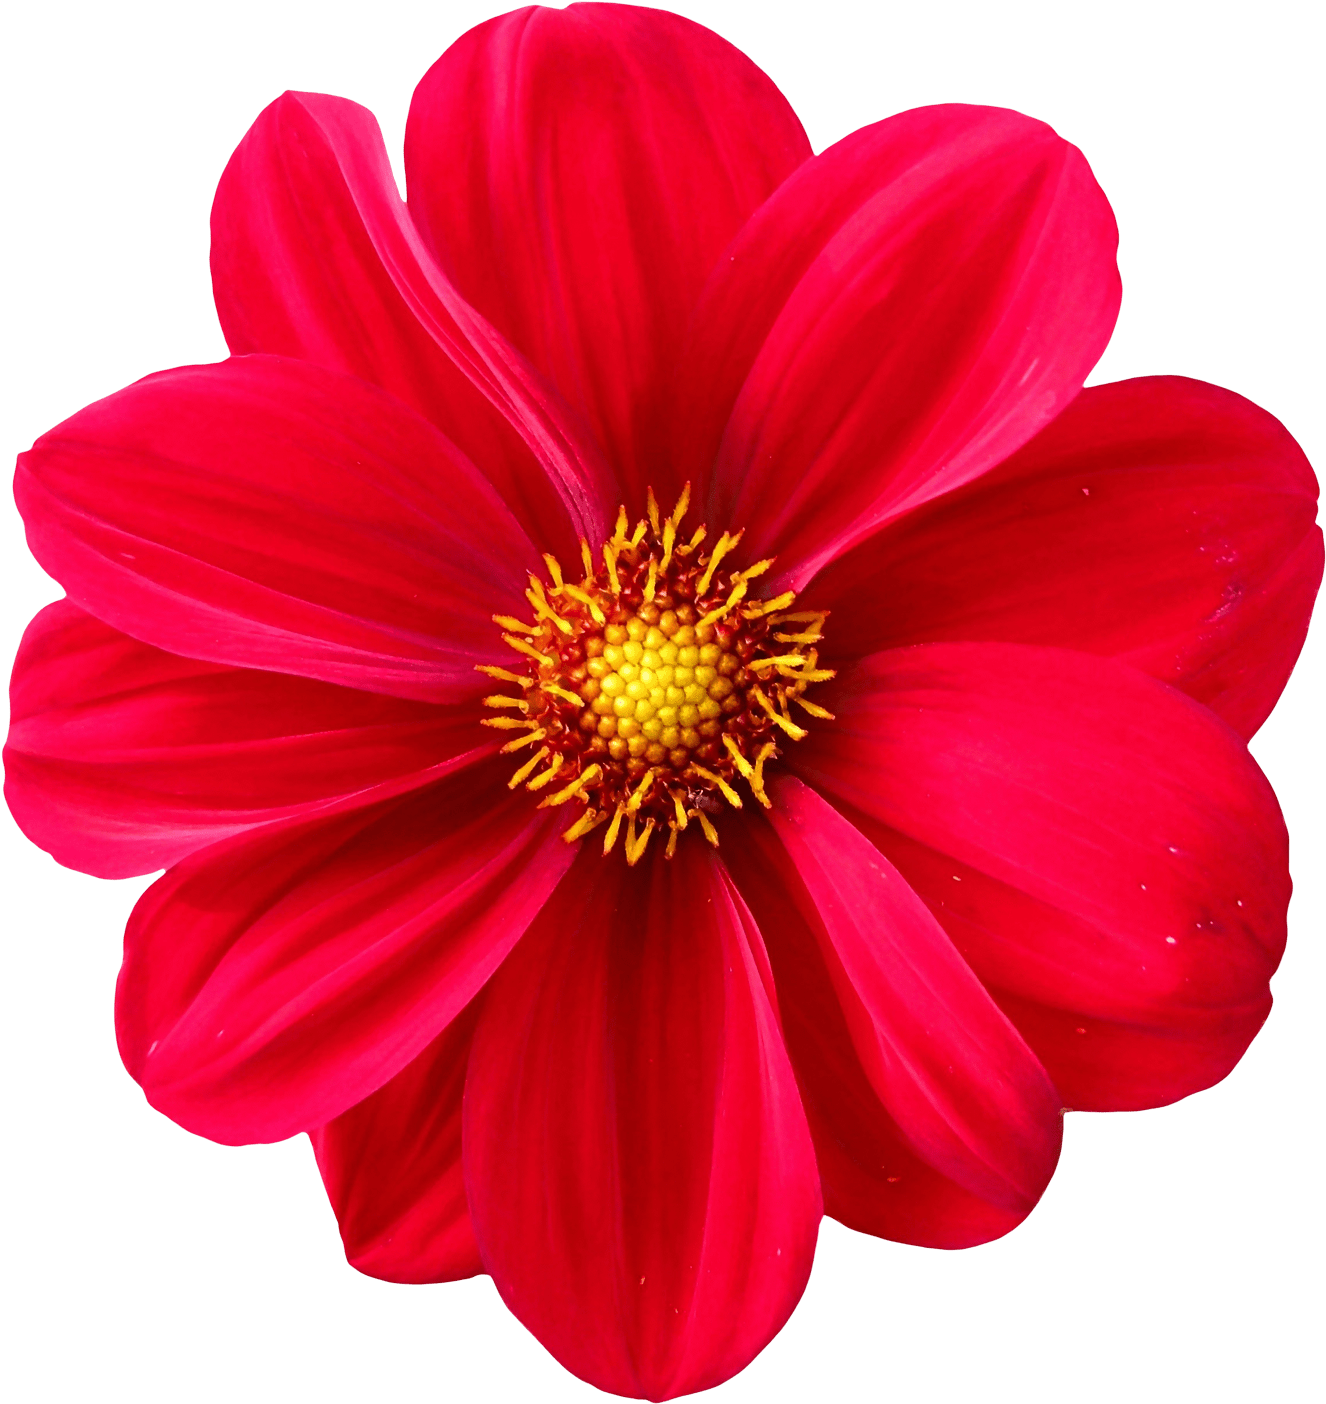 Dahlia Flower Png Transparent Image - Birthday Card For Best Friend Messages (1644x1562)